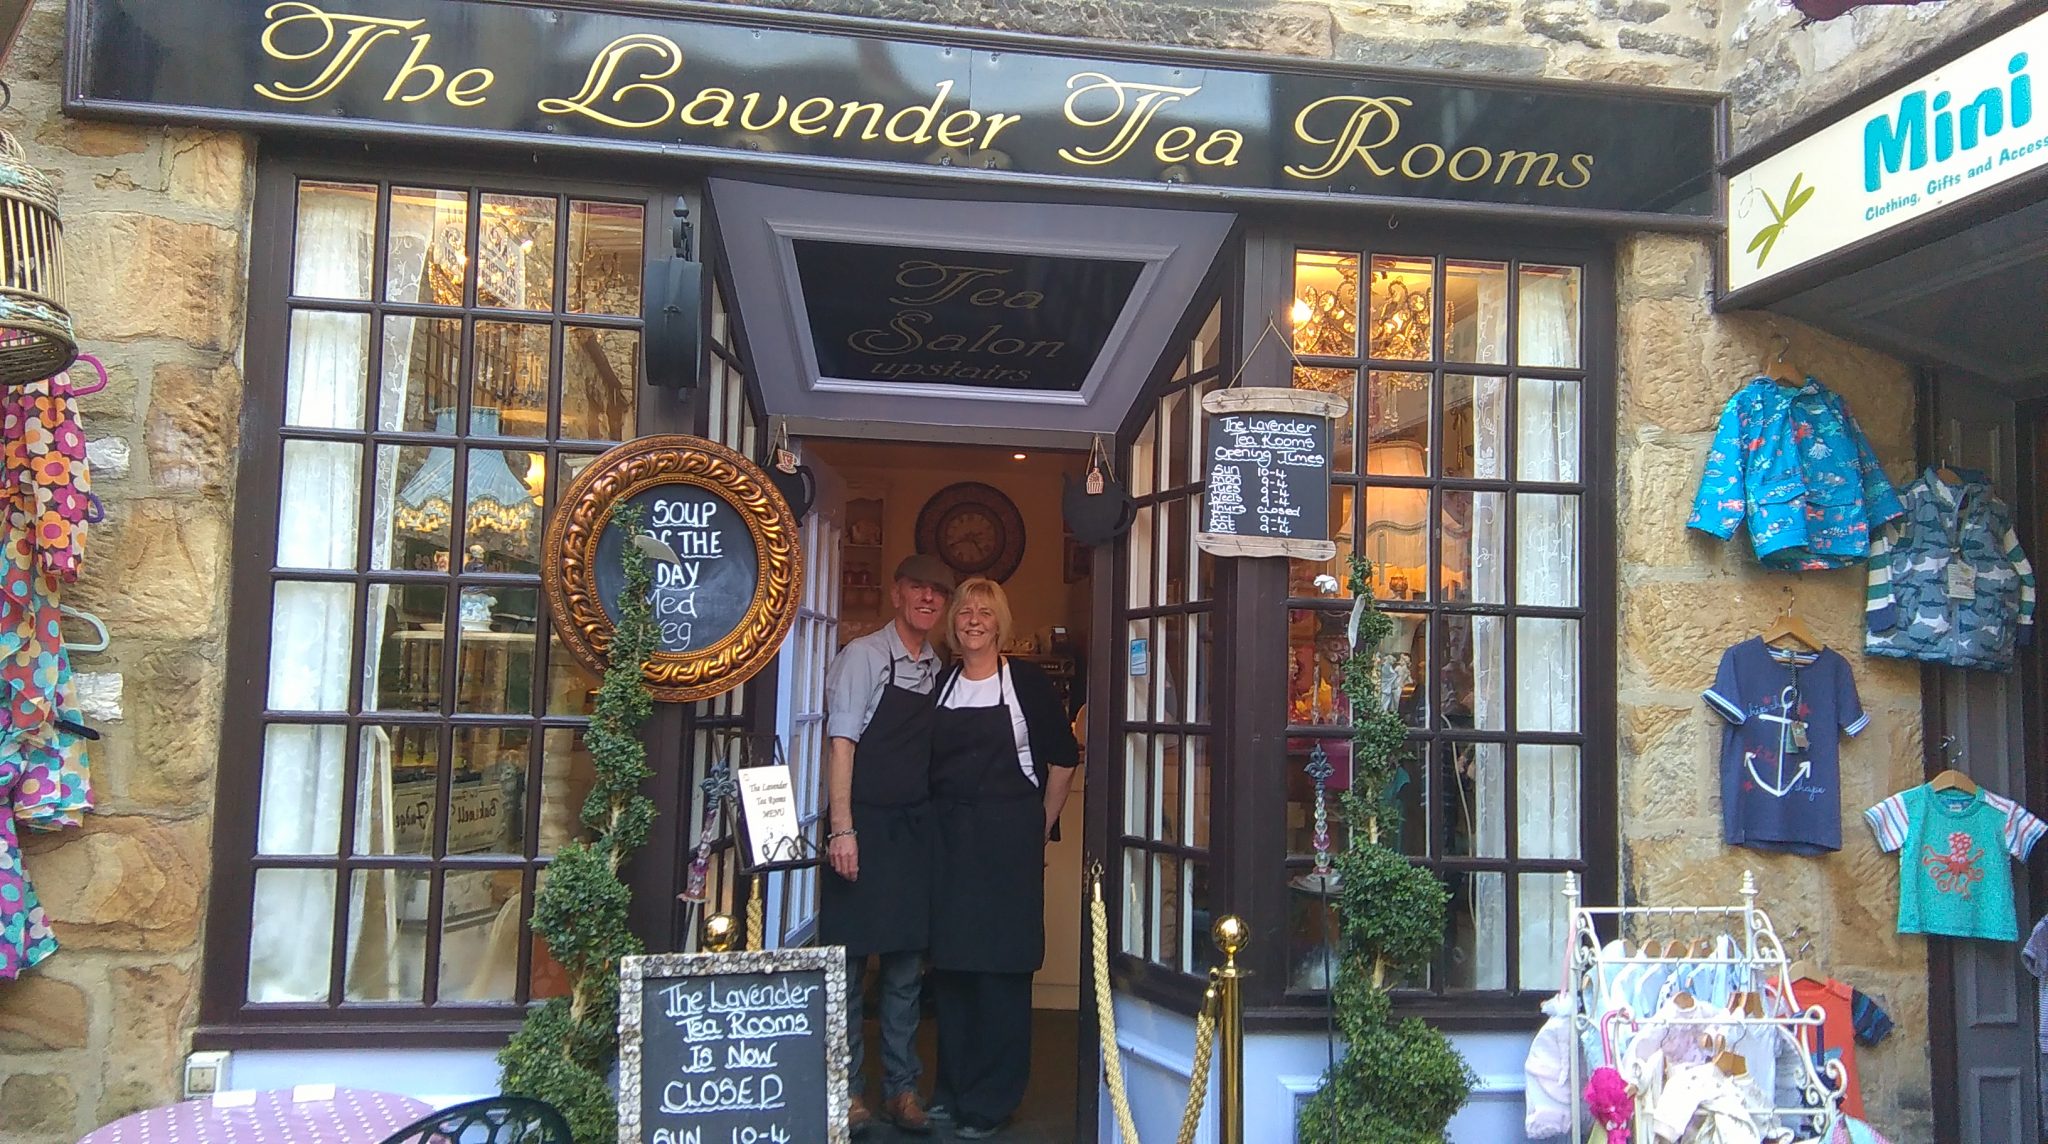 Café Review: Afternoon Tea @ The Lavender Tea Rooms, Bakewell